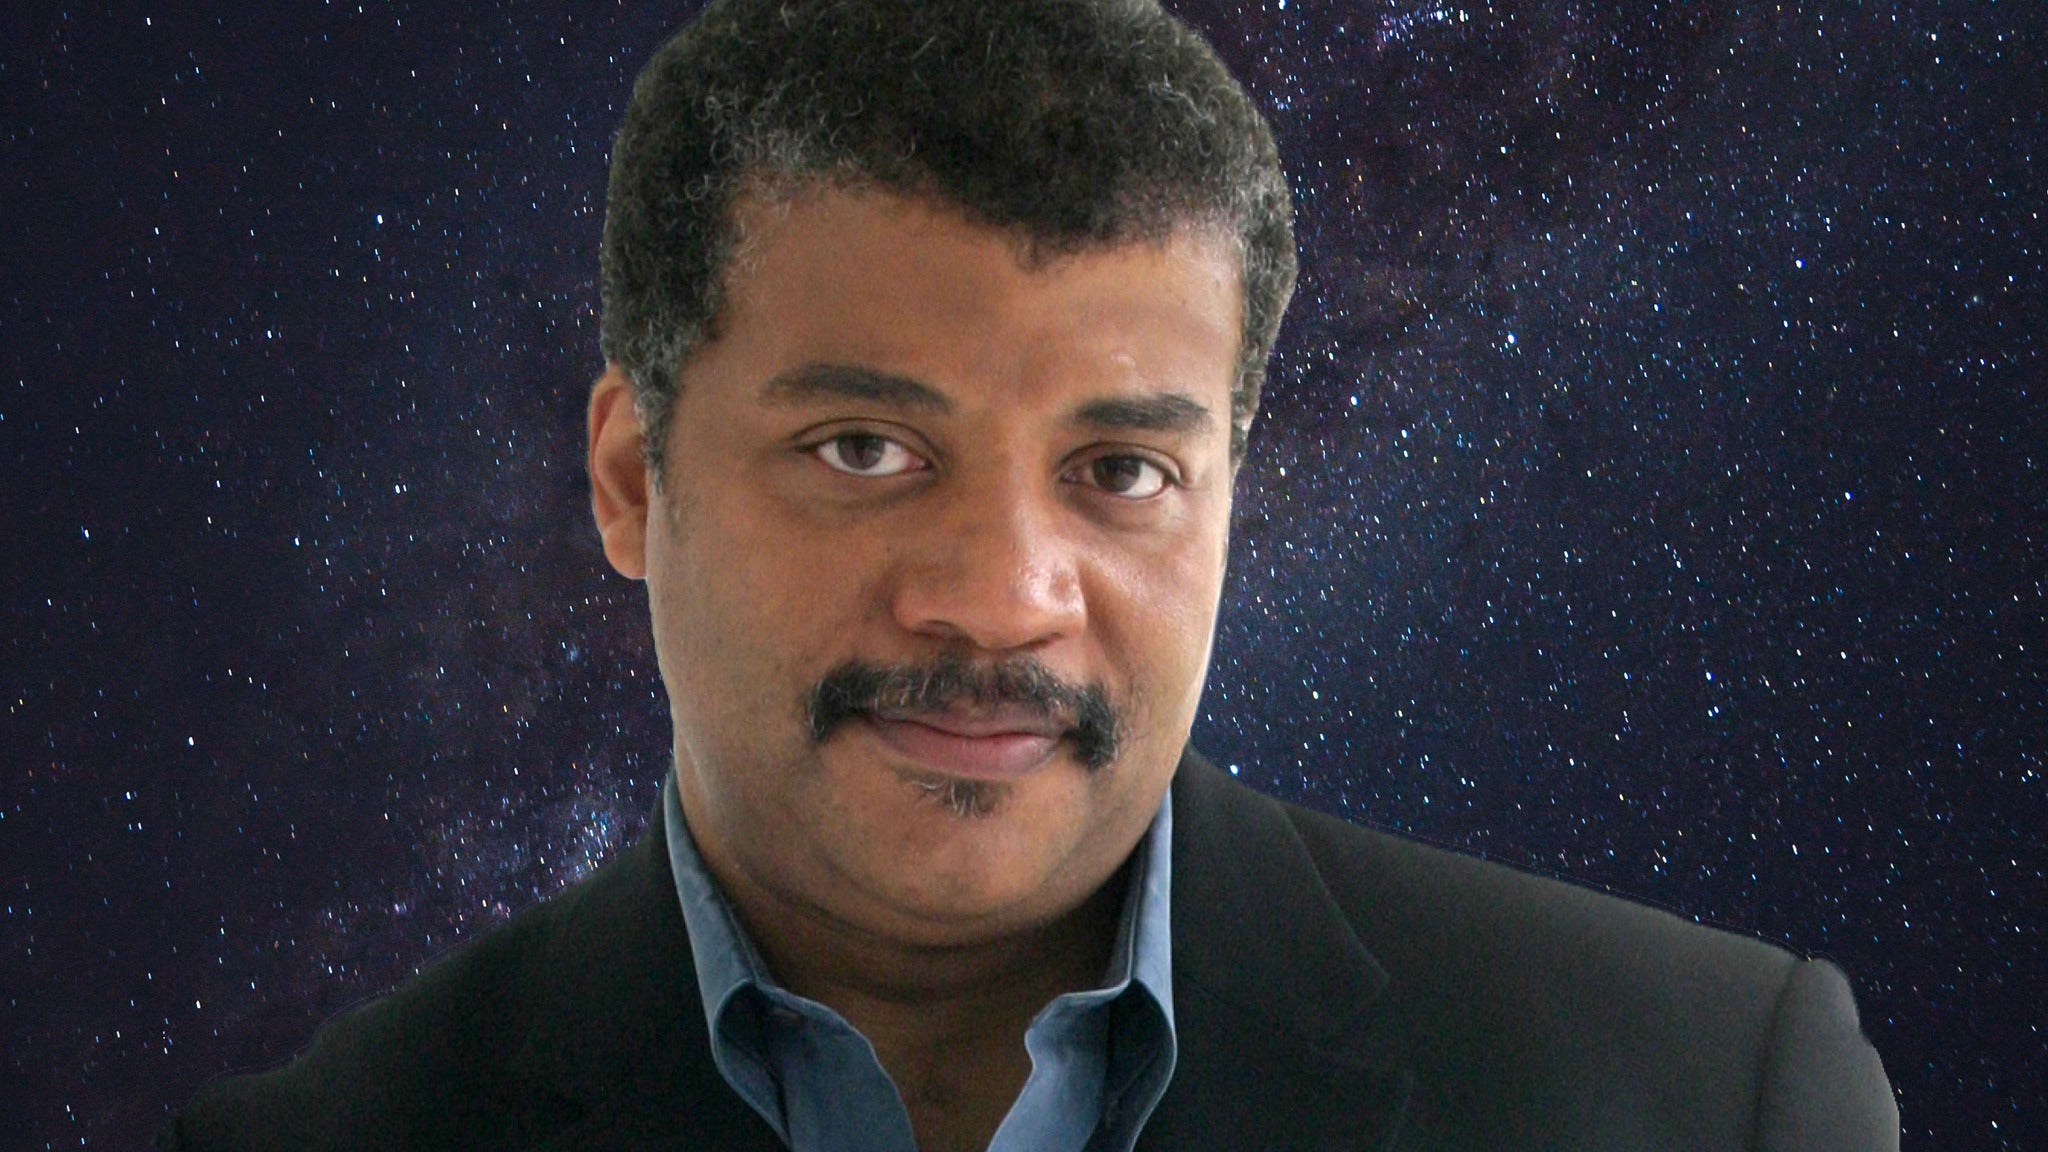 Dr. Neil Degrasse Tyson - An Astrophysicist Goes To The Movies